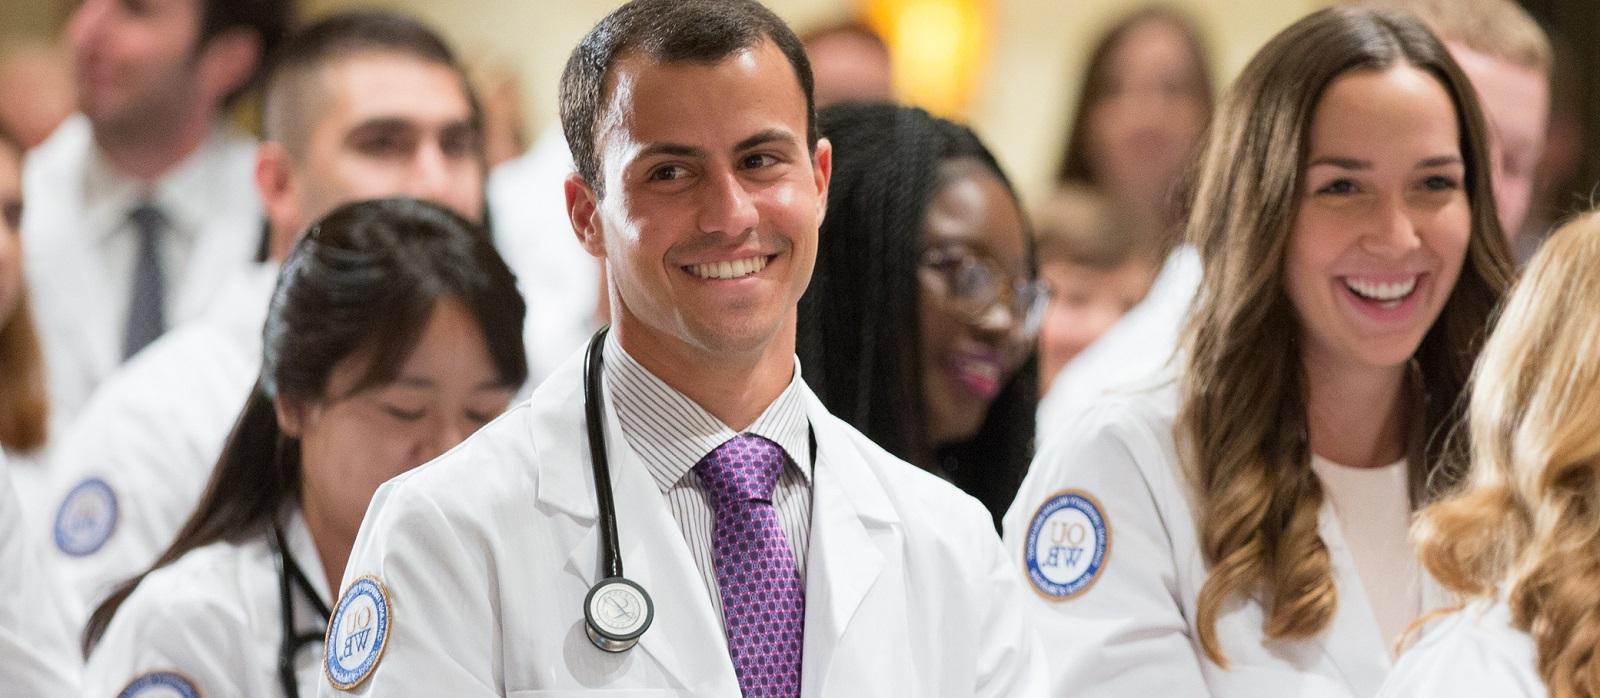 A student smiles as he stands in the crowd at the White Coat ceremony.